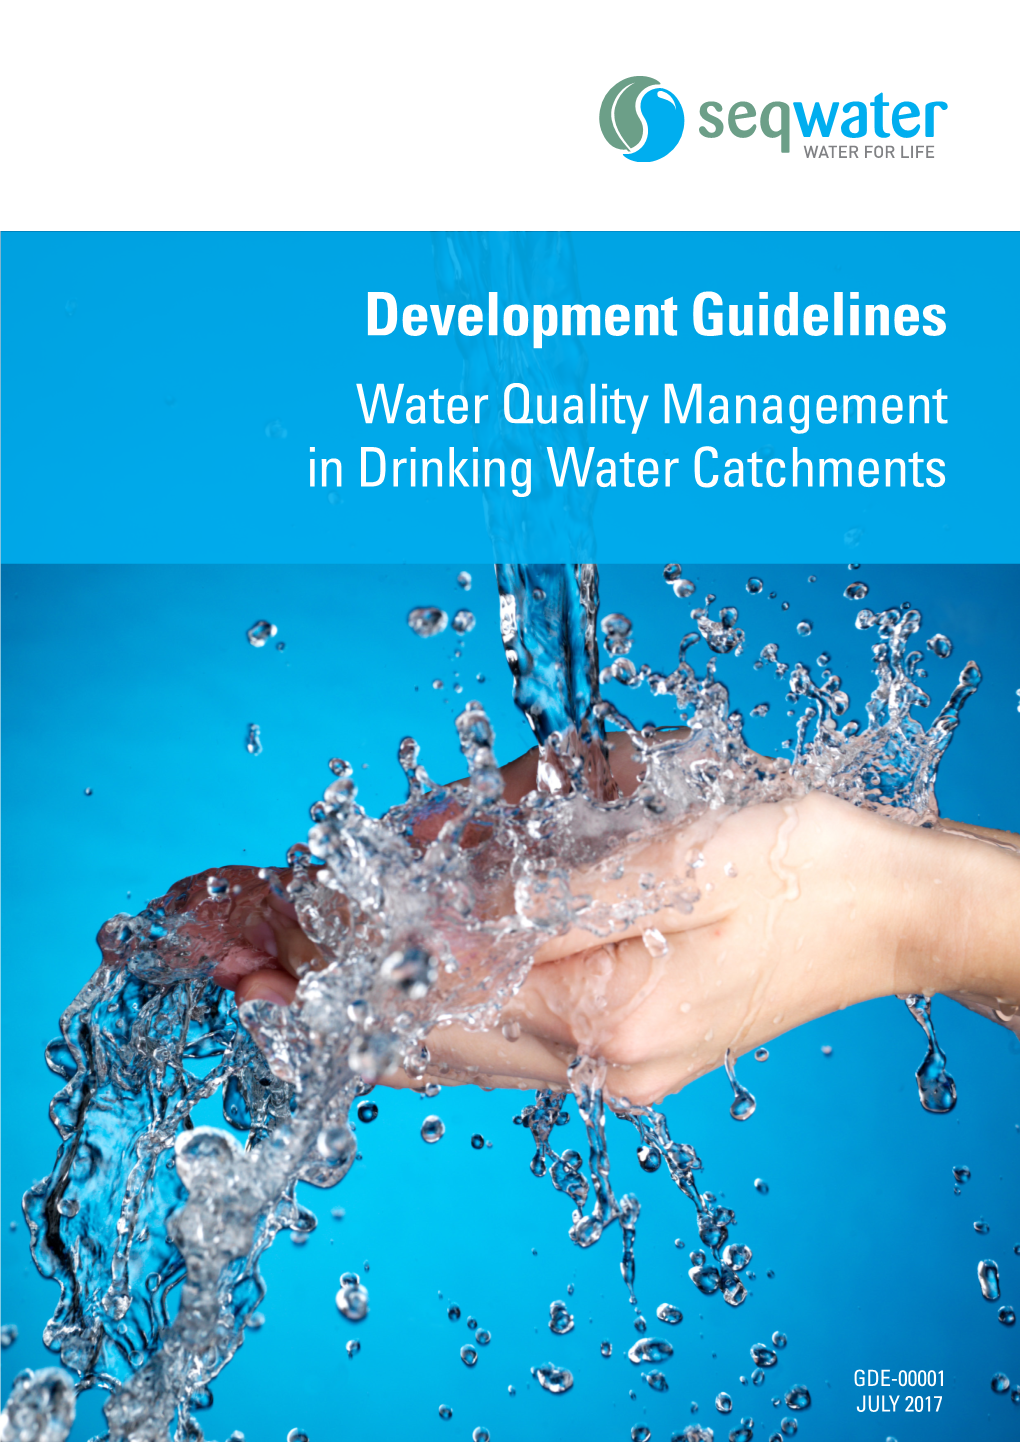 Development Guidelines for Water Quality Management